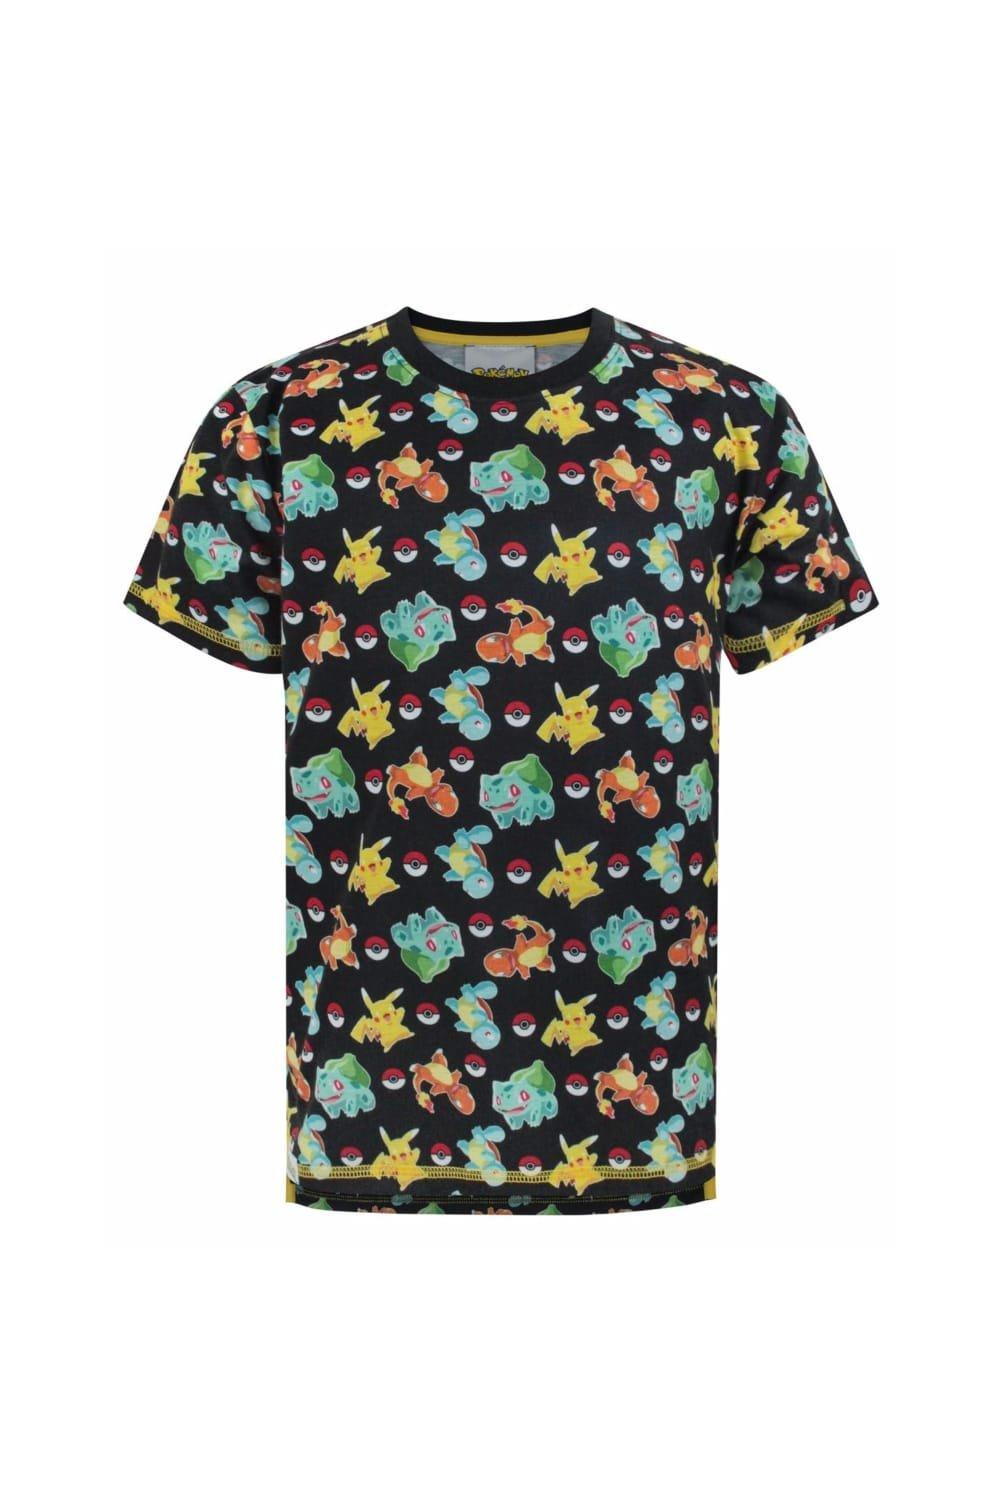 Official Starter Characters Sublimation T-Shirt